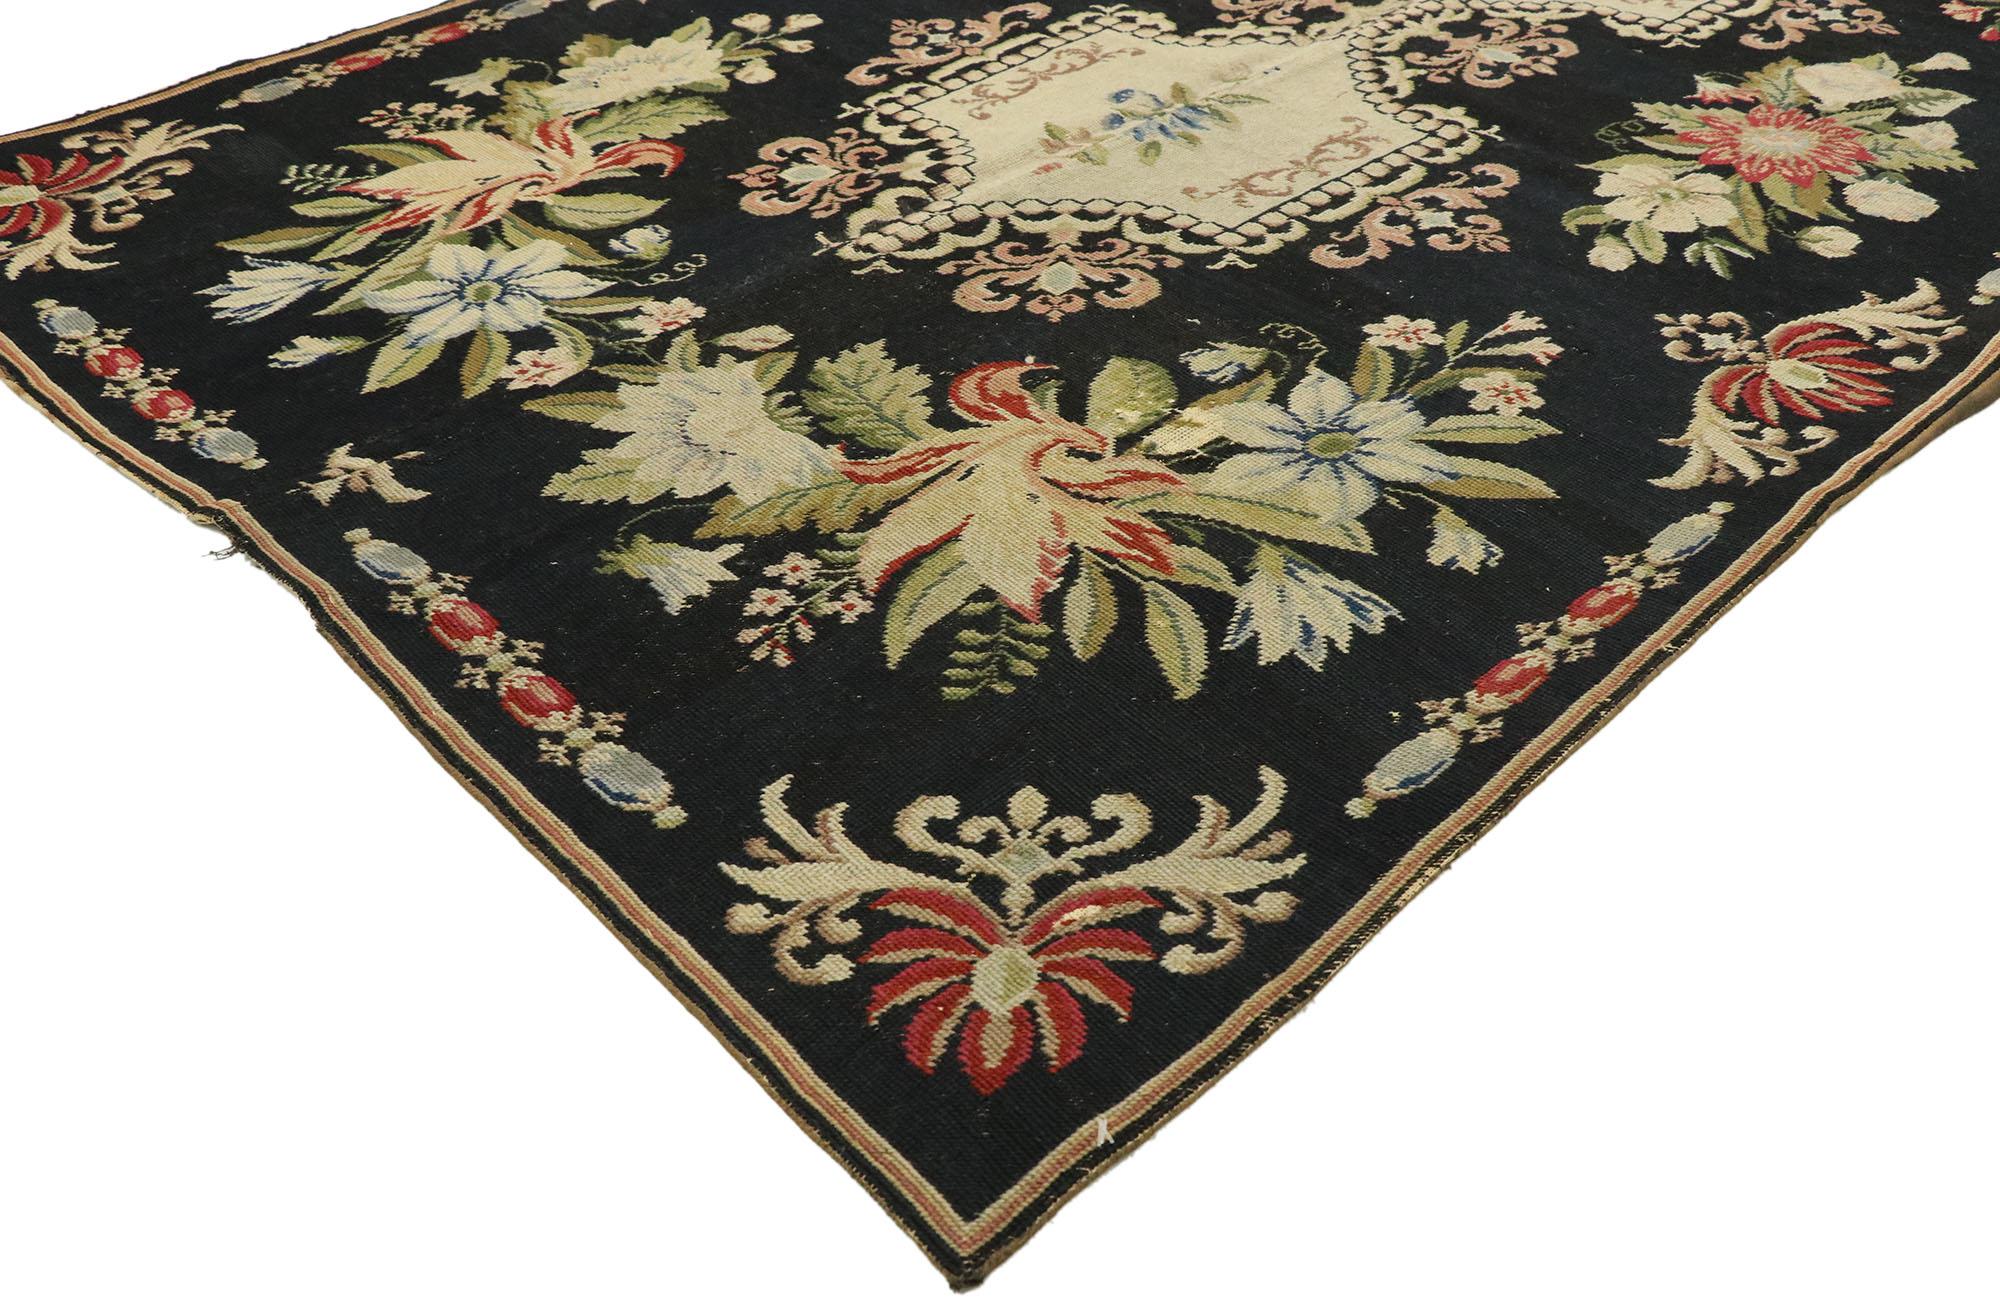 73615 antique English Garden needlepoint runner with Baroque Floral Chintz style. Drawing inspiration from Mario Buatta with romantic sensibility, this late 19th century antique English garden needlepoint runner beautifully embodies Baroque English